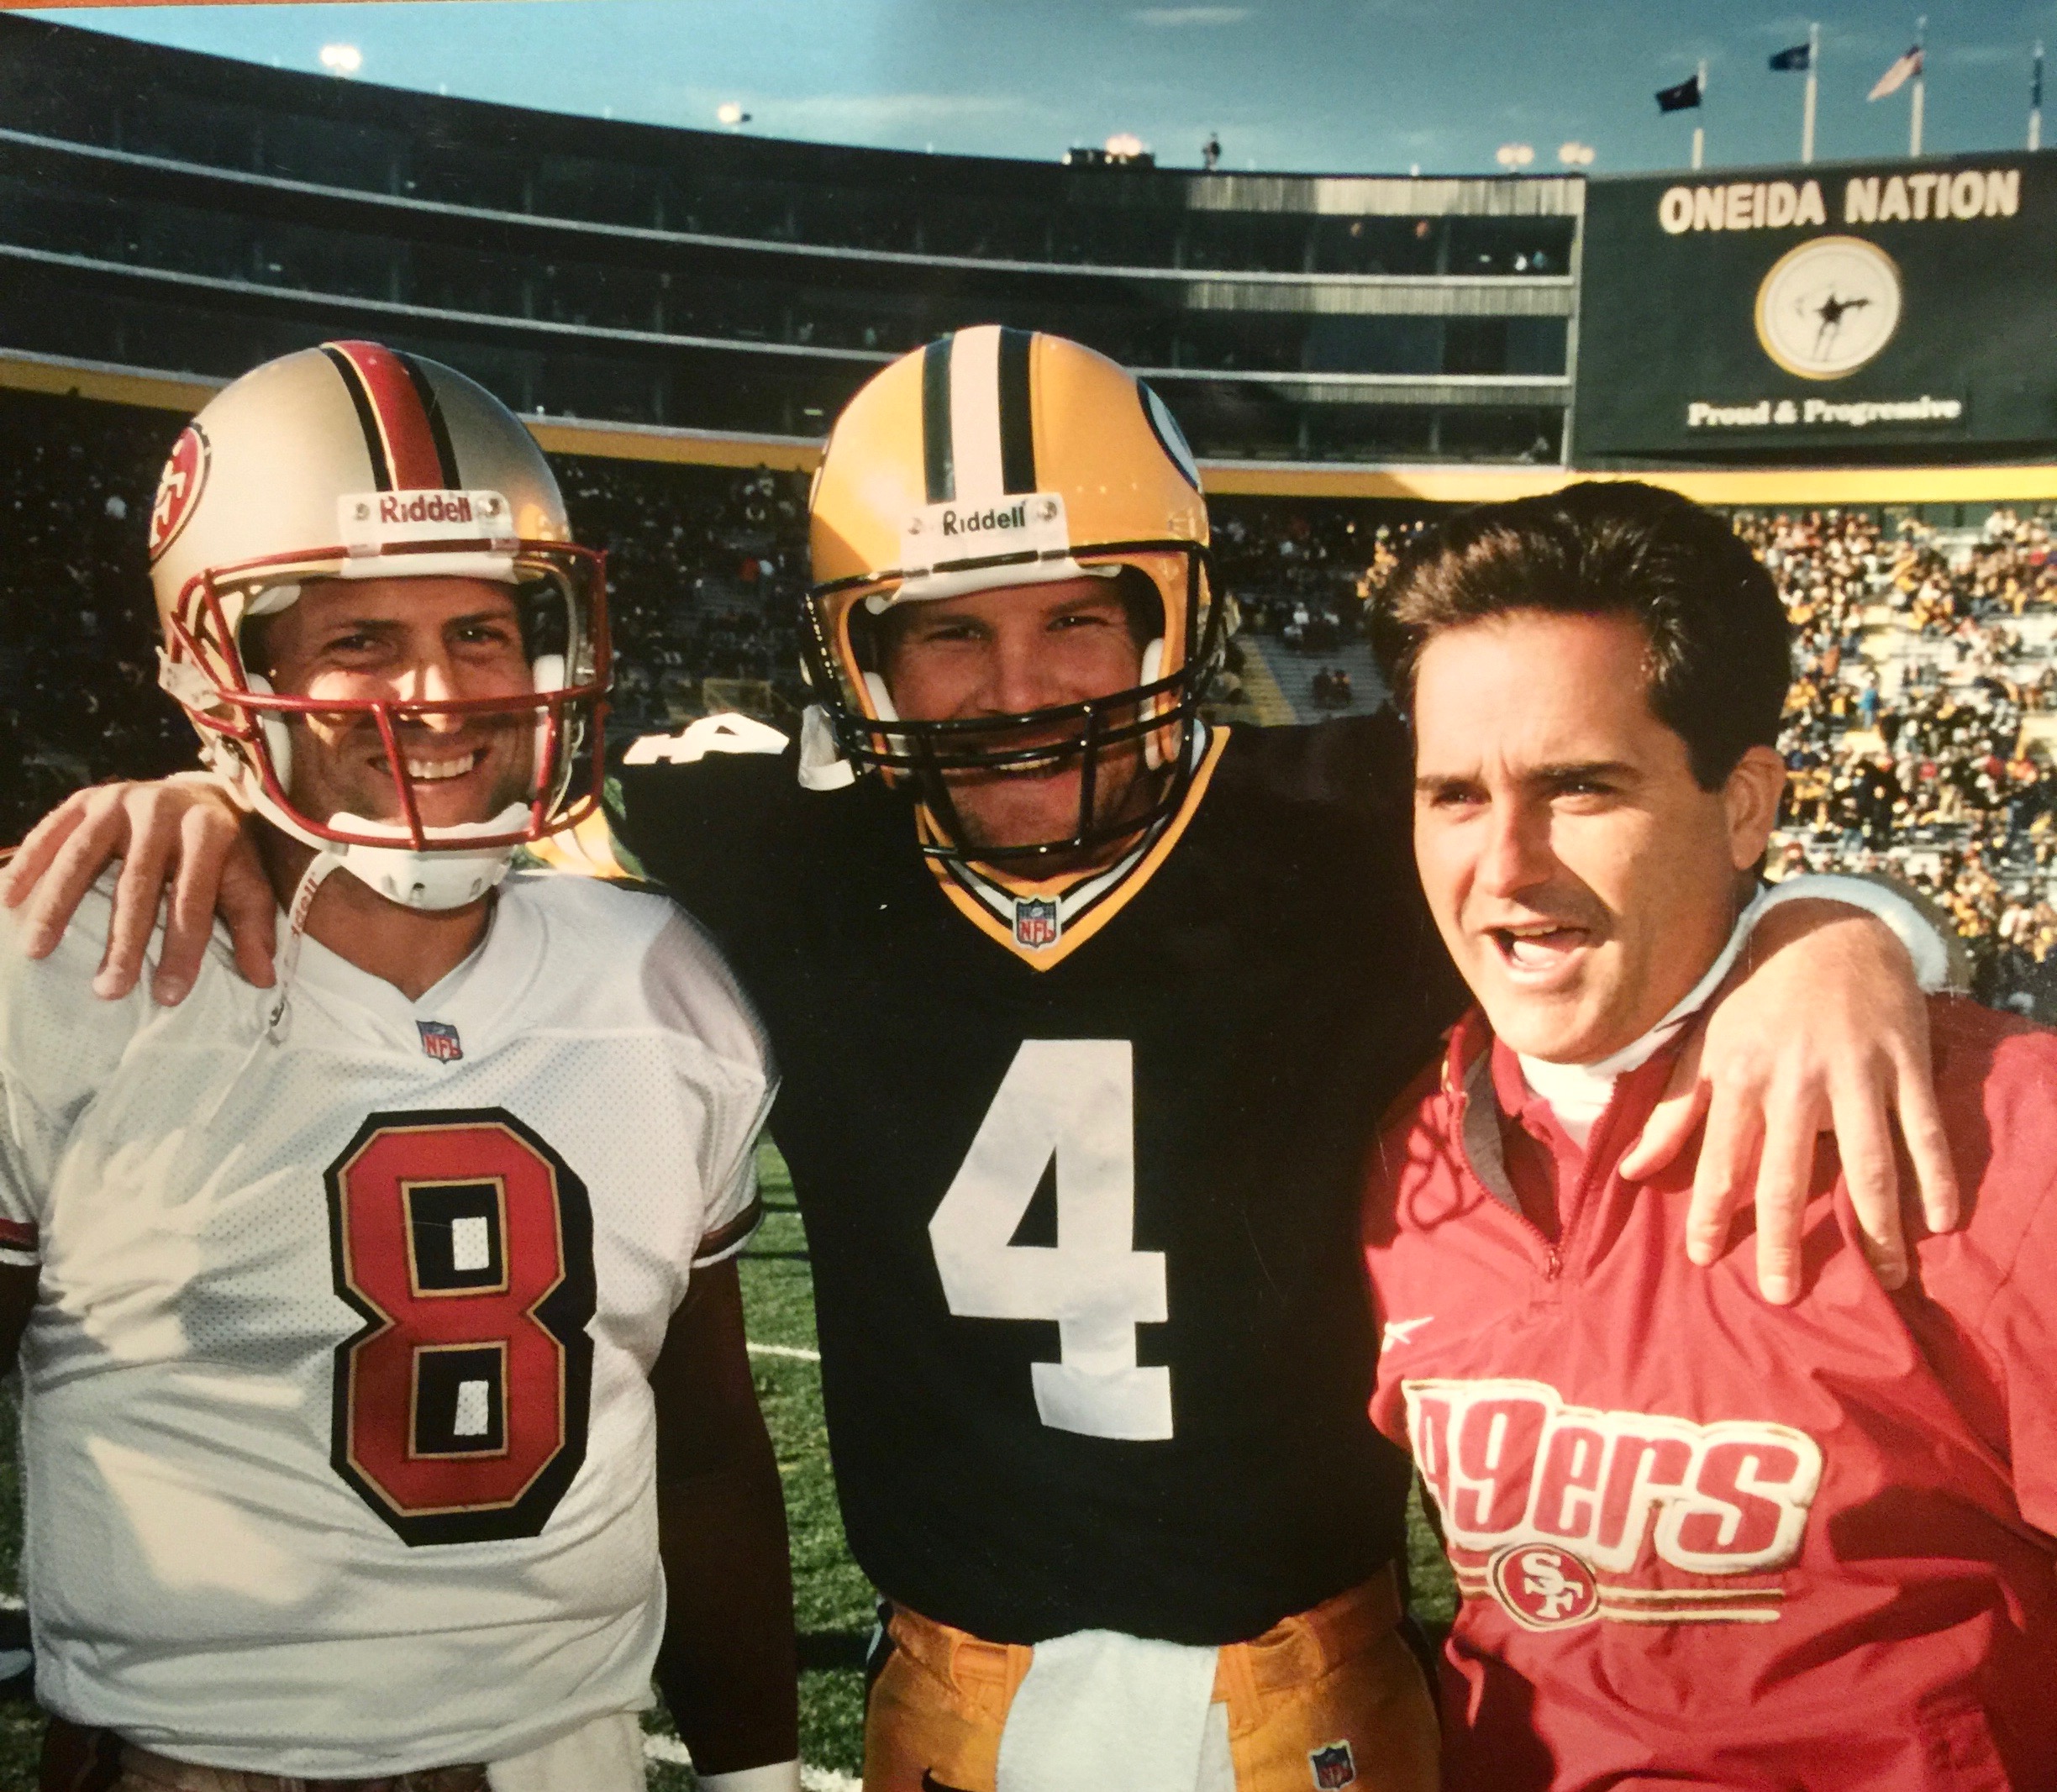 Head coach Mariucci with his 49ers quarterback Steve Young and Packers quarterback Brett Favre, whom he used to coach as an assistant in Green Bay.